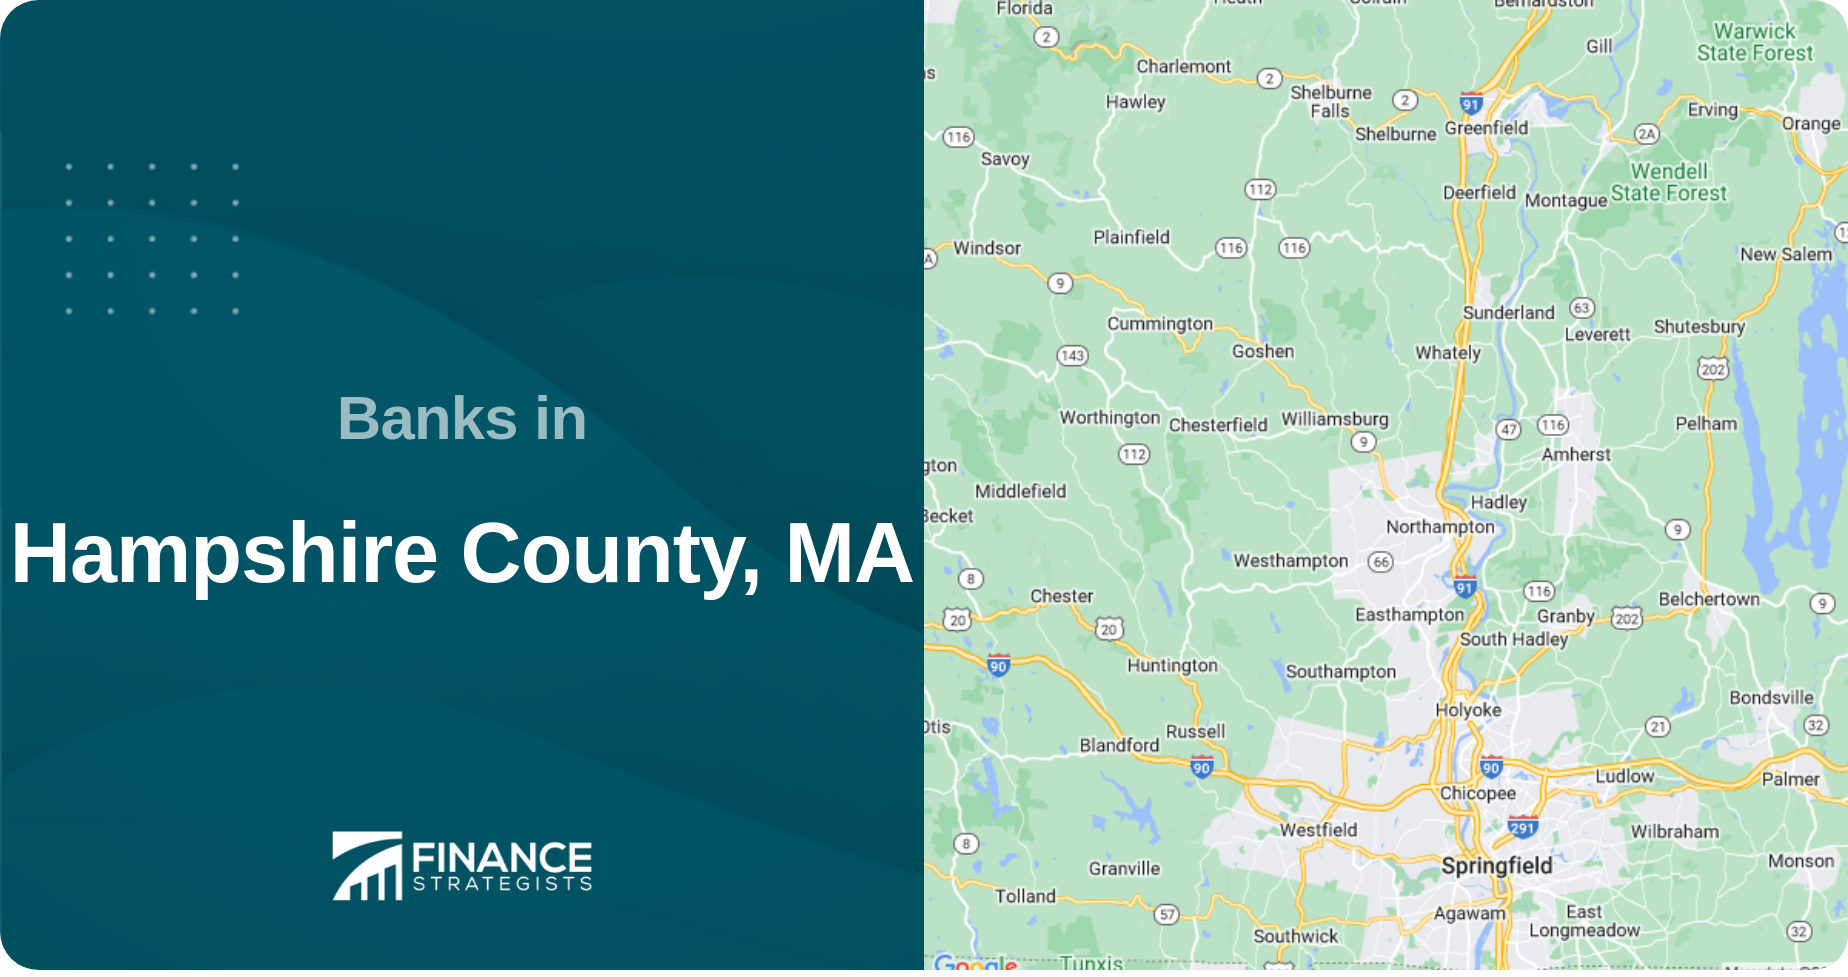 Banks in Hampshire County, MA